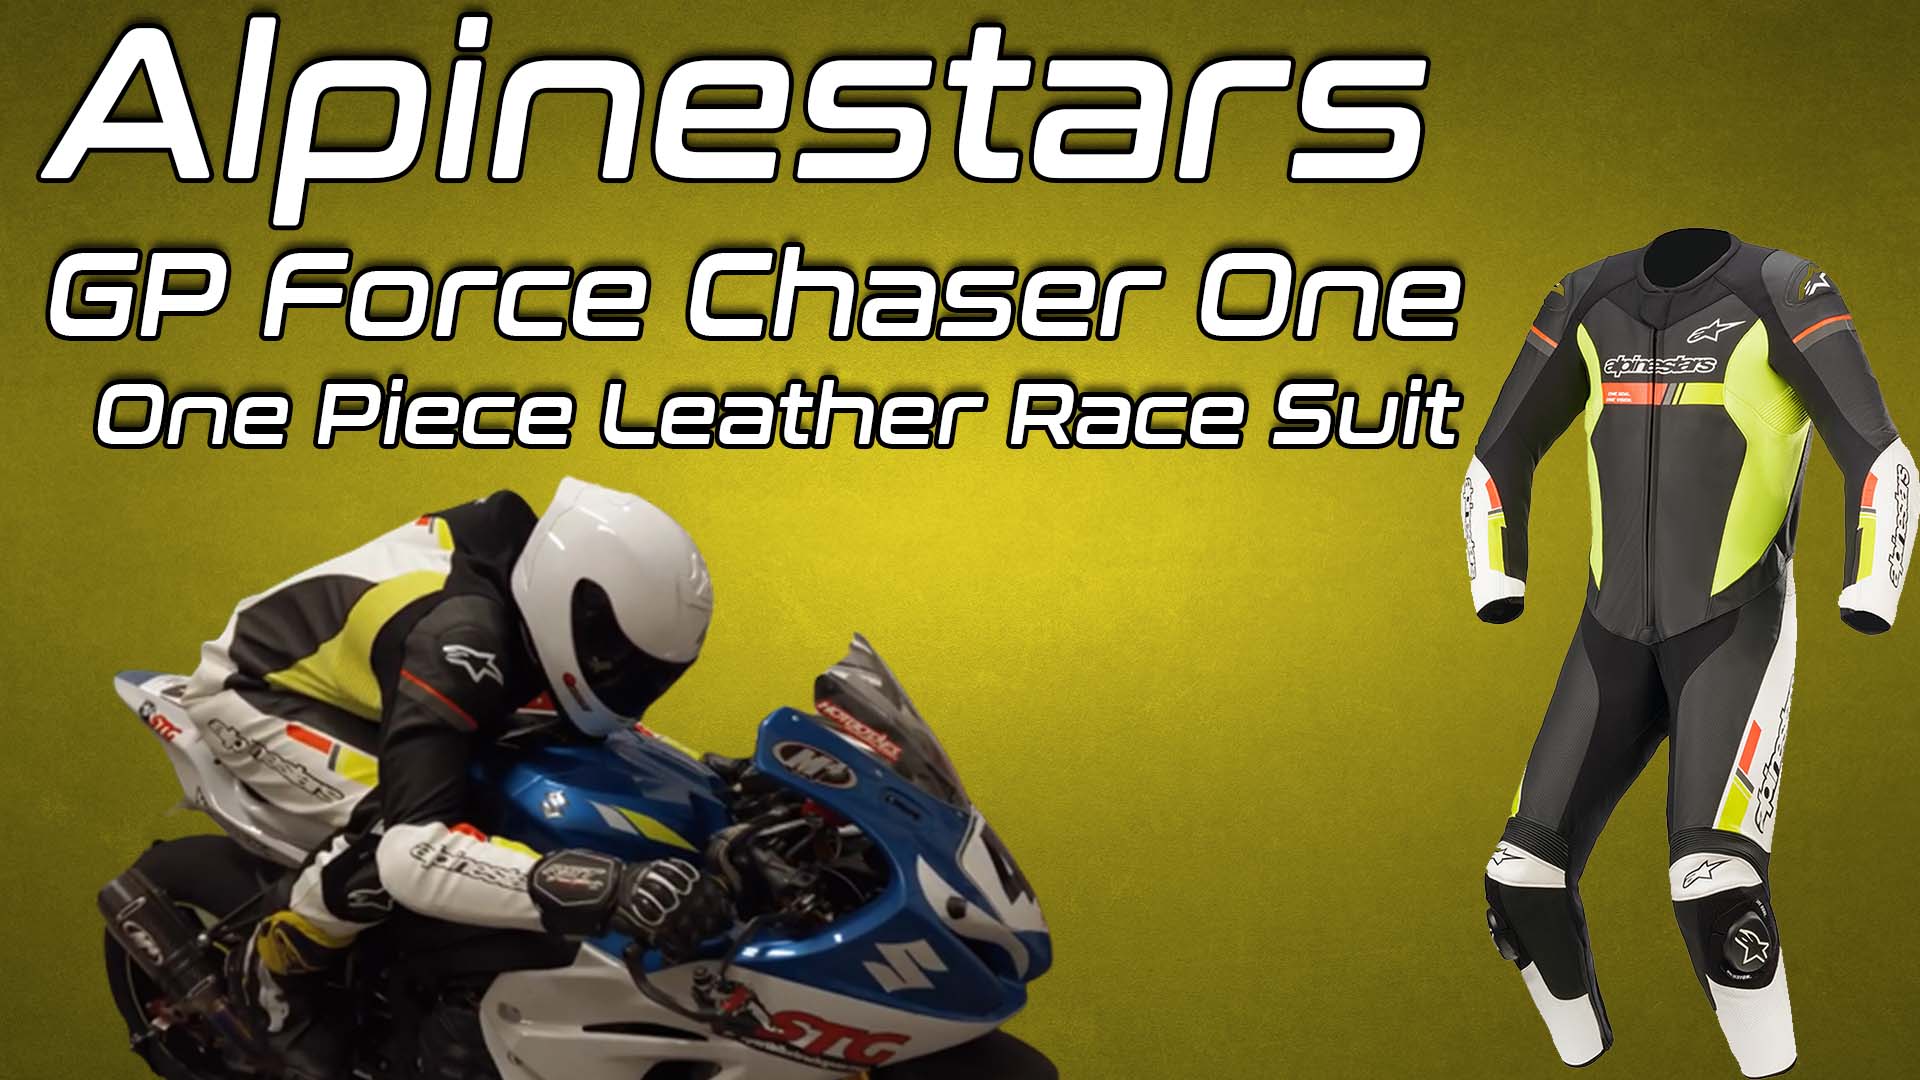 Alpinestars GP Force Chaser One Piece Leather Race Suit